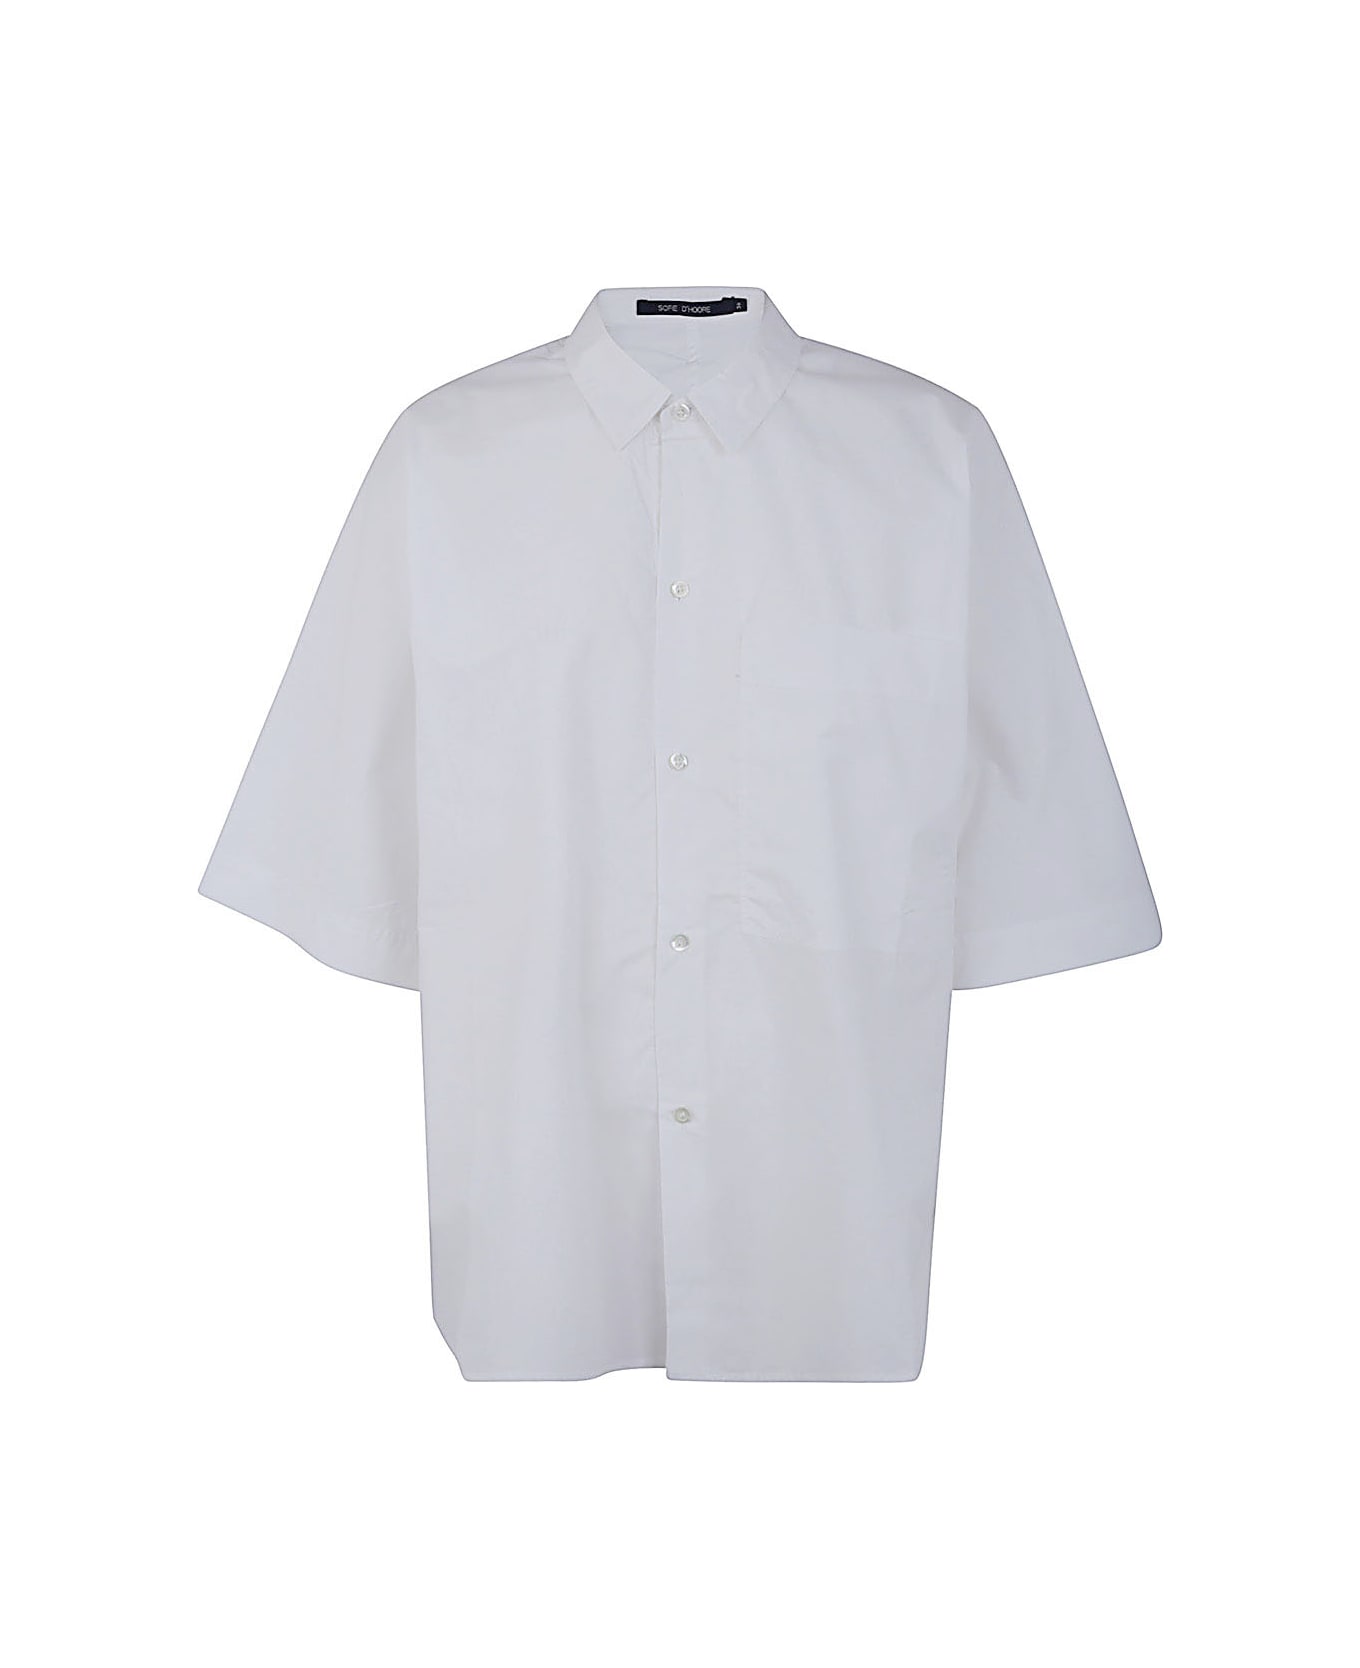 Sofie d'Hoore Short Sleeve Shirt With Front Placket - White